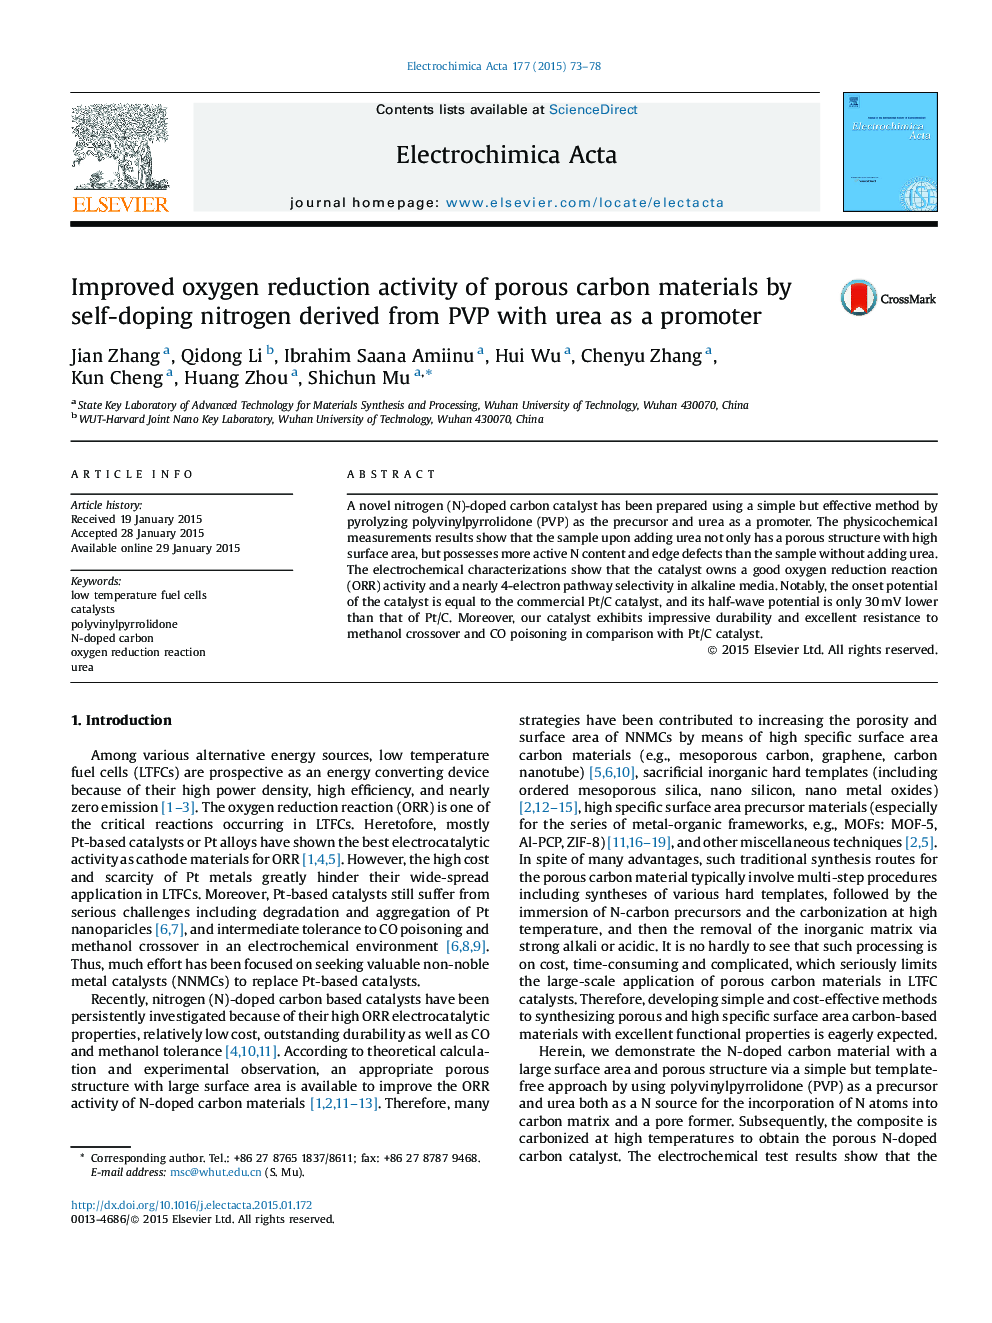 Improved oxygen reduction activity of porous carbon materials by self-doping nitrogen derived from PVP with urea as a promoter